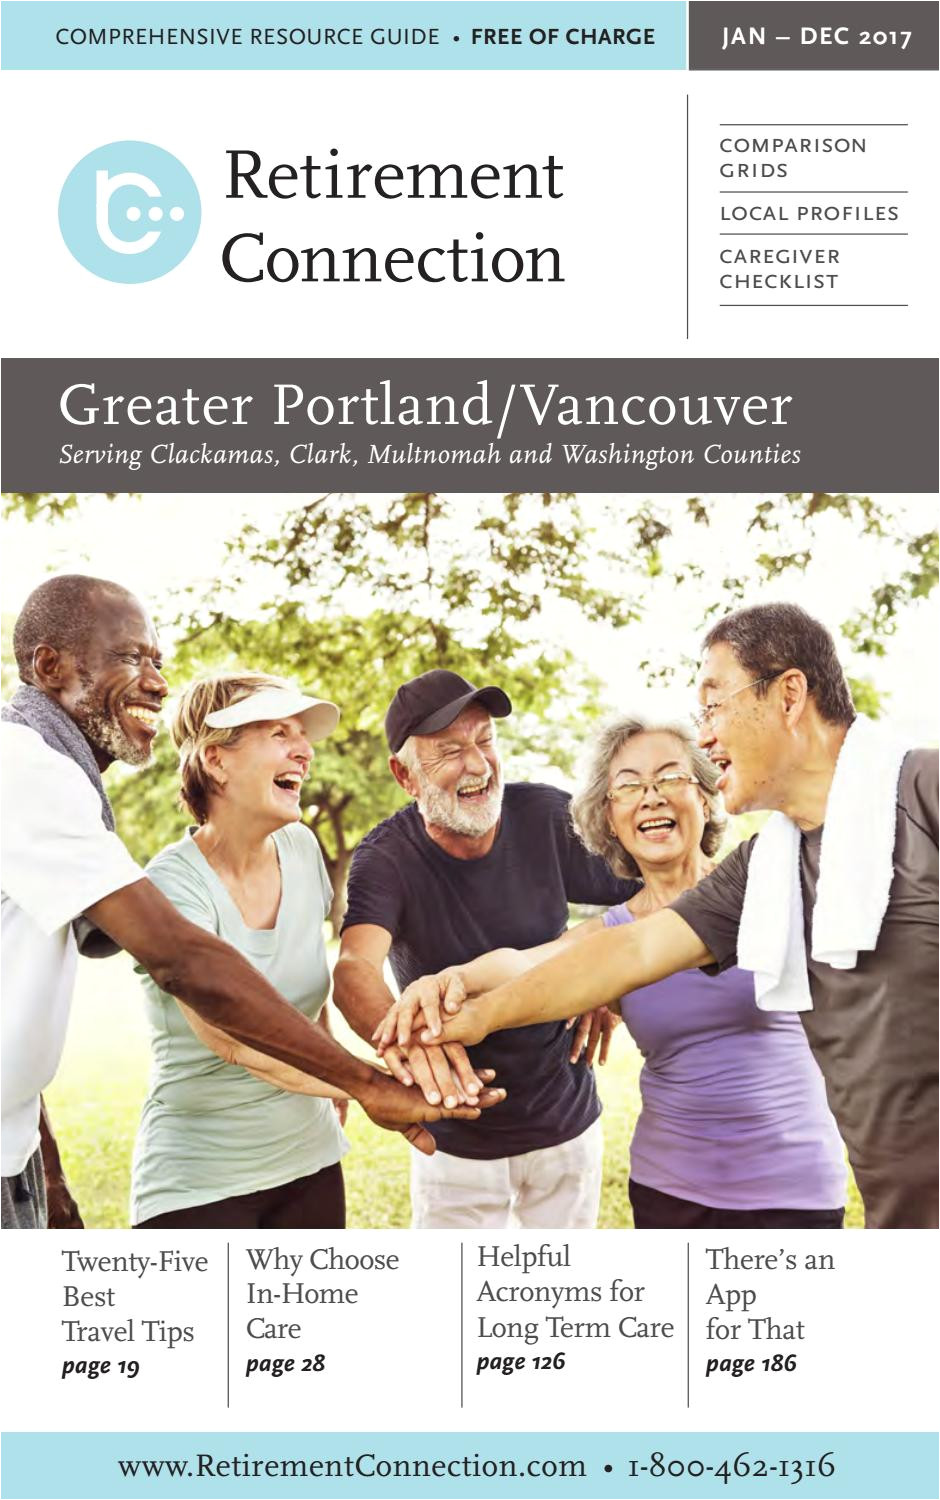 Pick-n-pull Vancouver Wa 98662 January 2017 Retirement Connection Guide Of Greater Portland